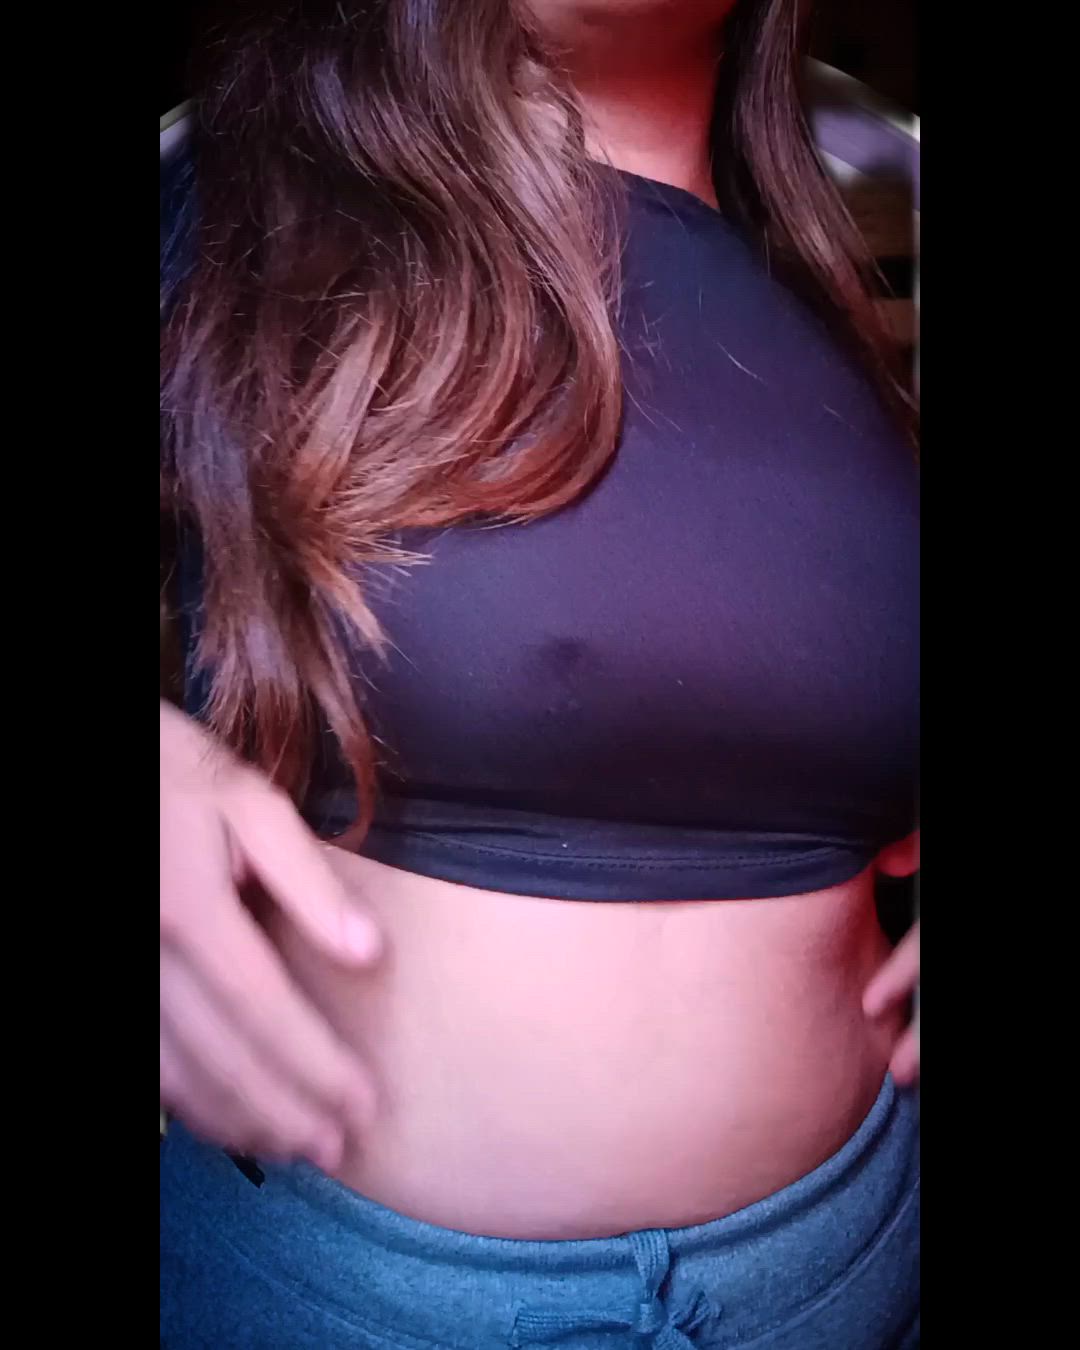 Big Tits porn video with onlyfans model vicky🦋 <strong>@windlila</strong>